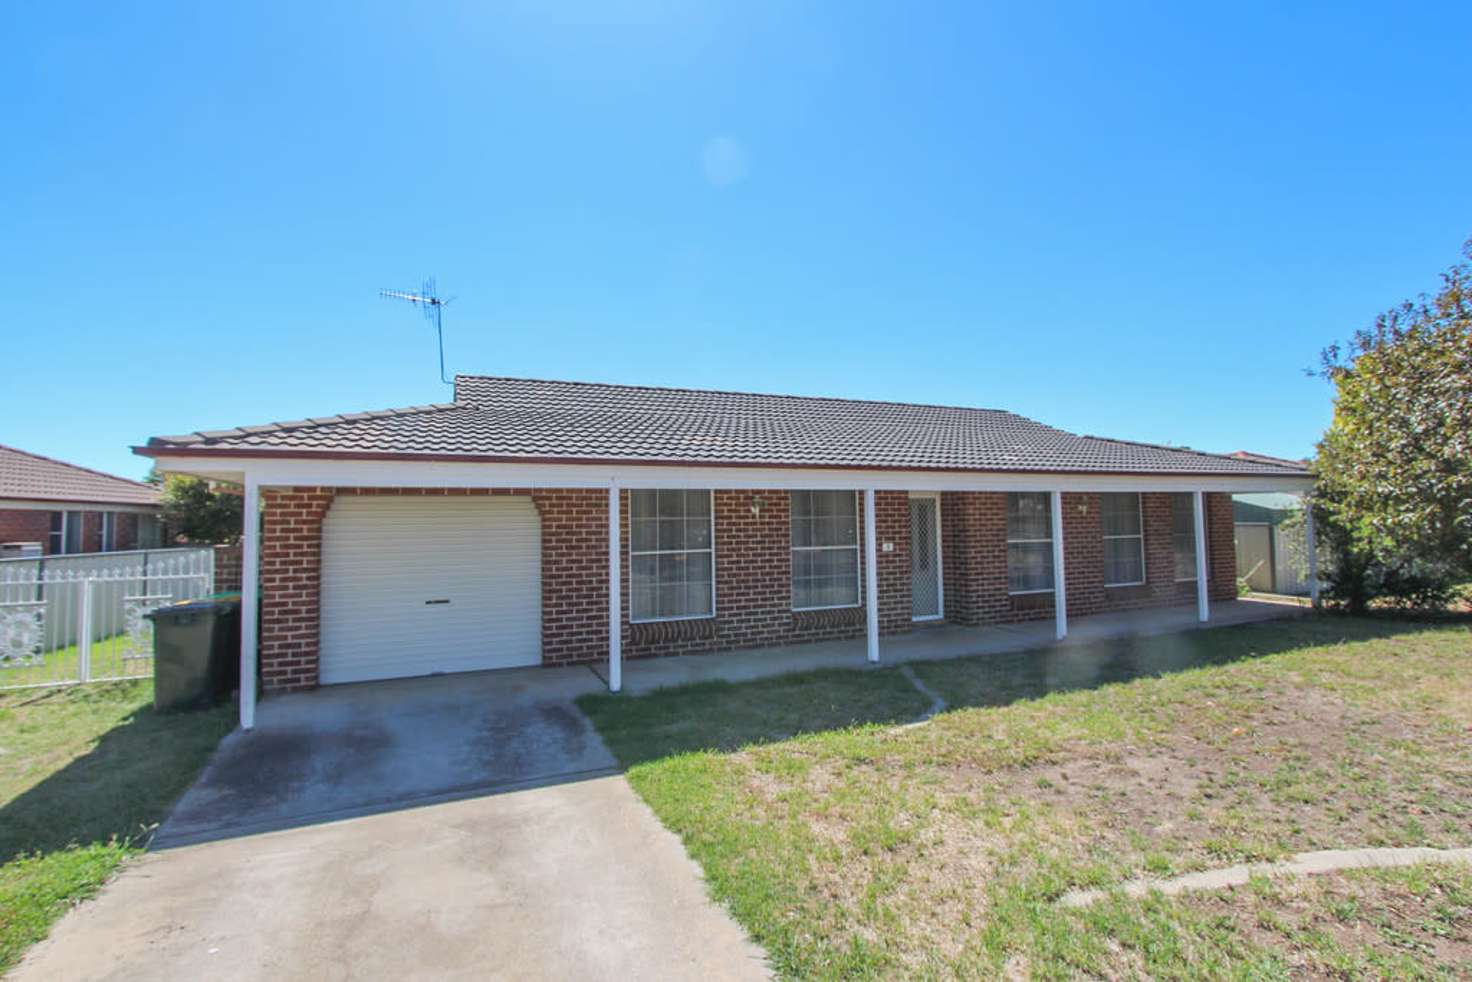 Main view of Homely house listing, 3 Richardson St, Bathurst NSW 2795